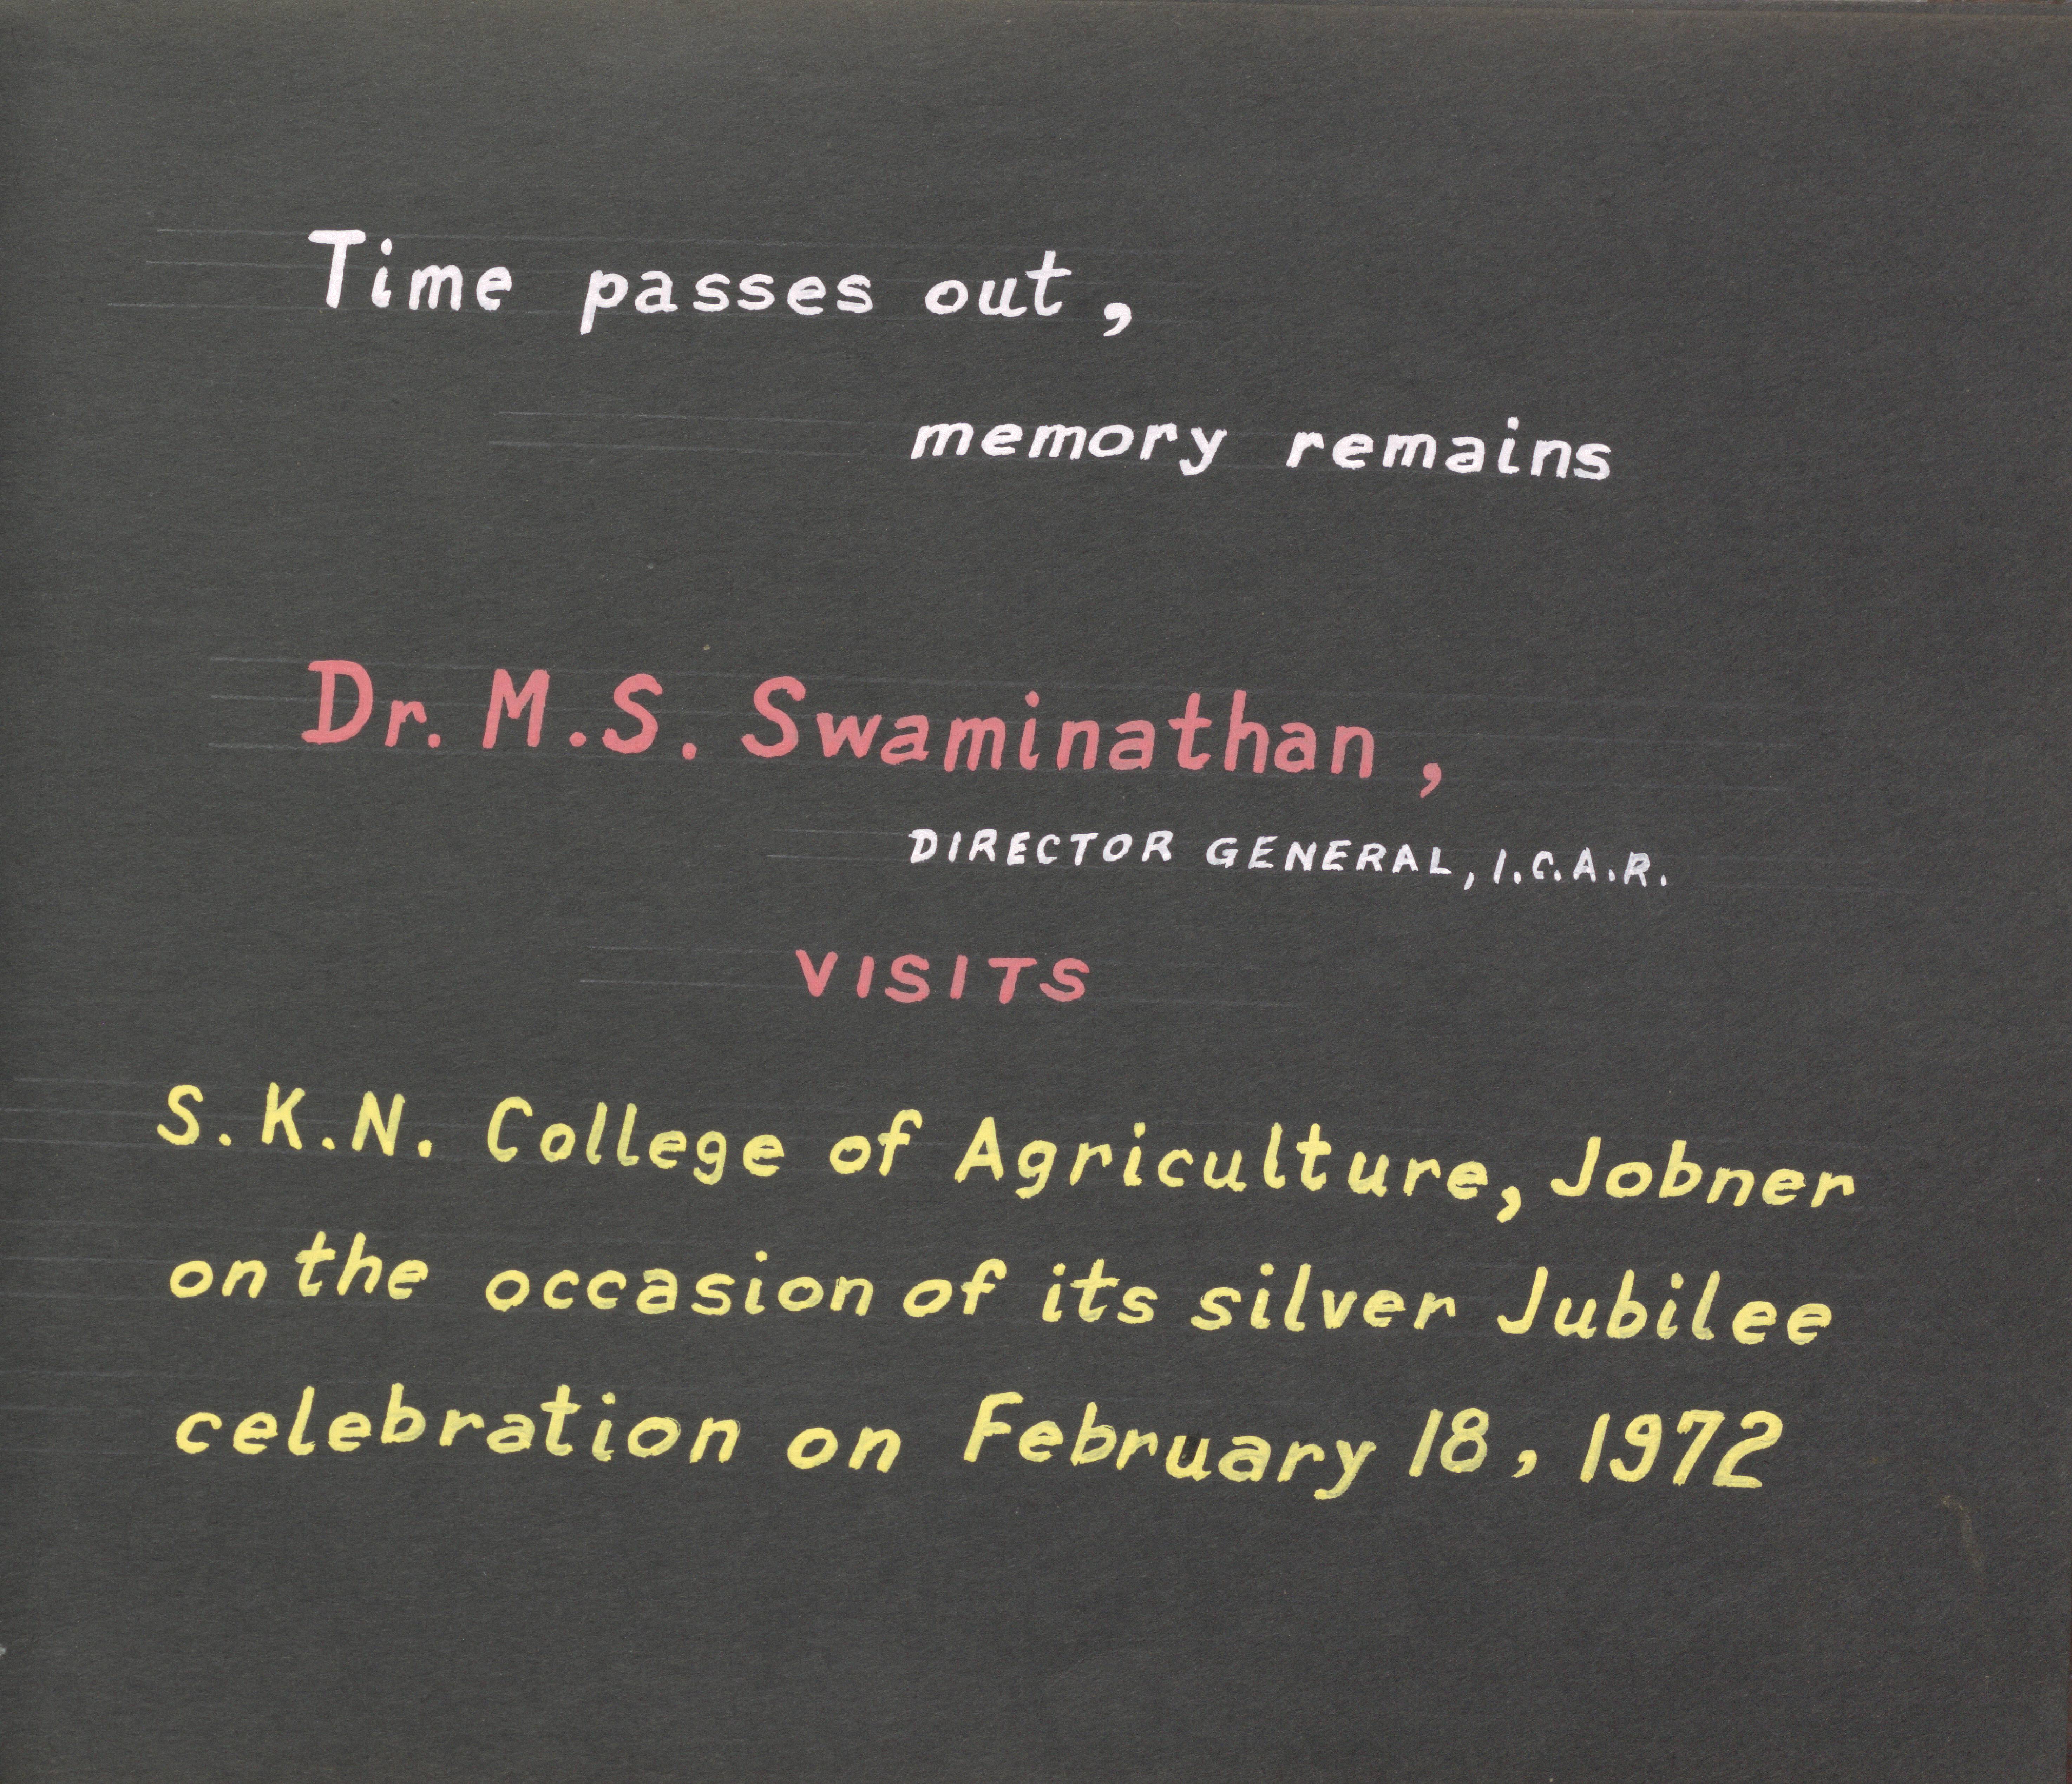 Visit of M.S. Swaminathan to S.K.N. College of Agriculture, Silver Jubilee Celebrations